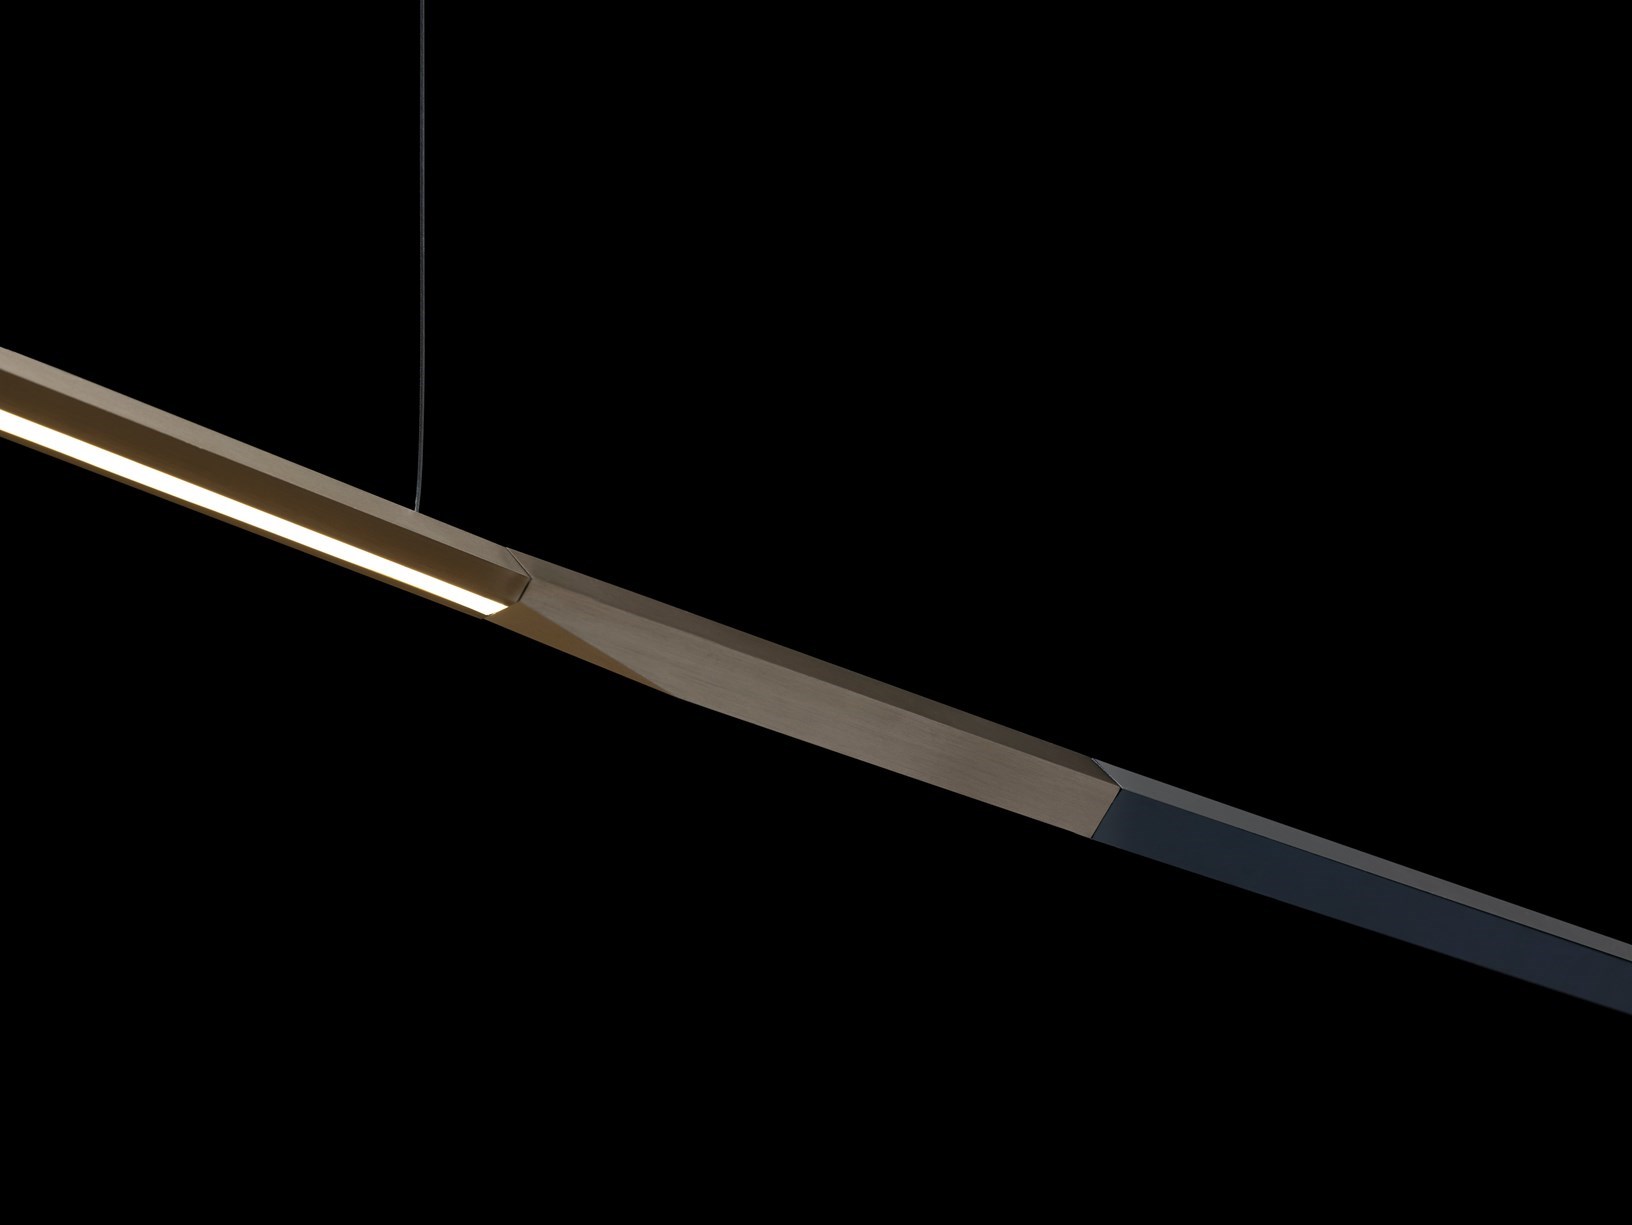 Pendant Lamp from the New Lamp Collection by David Lopez Quincoces